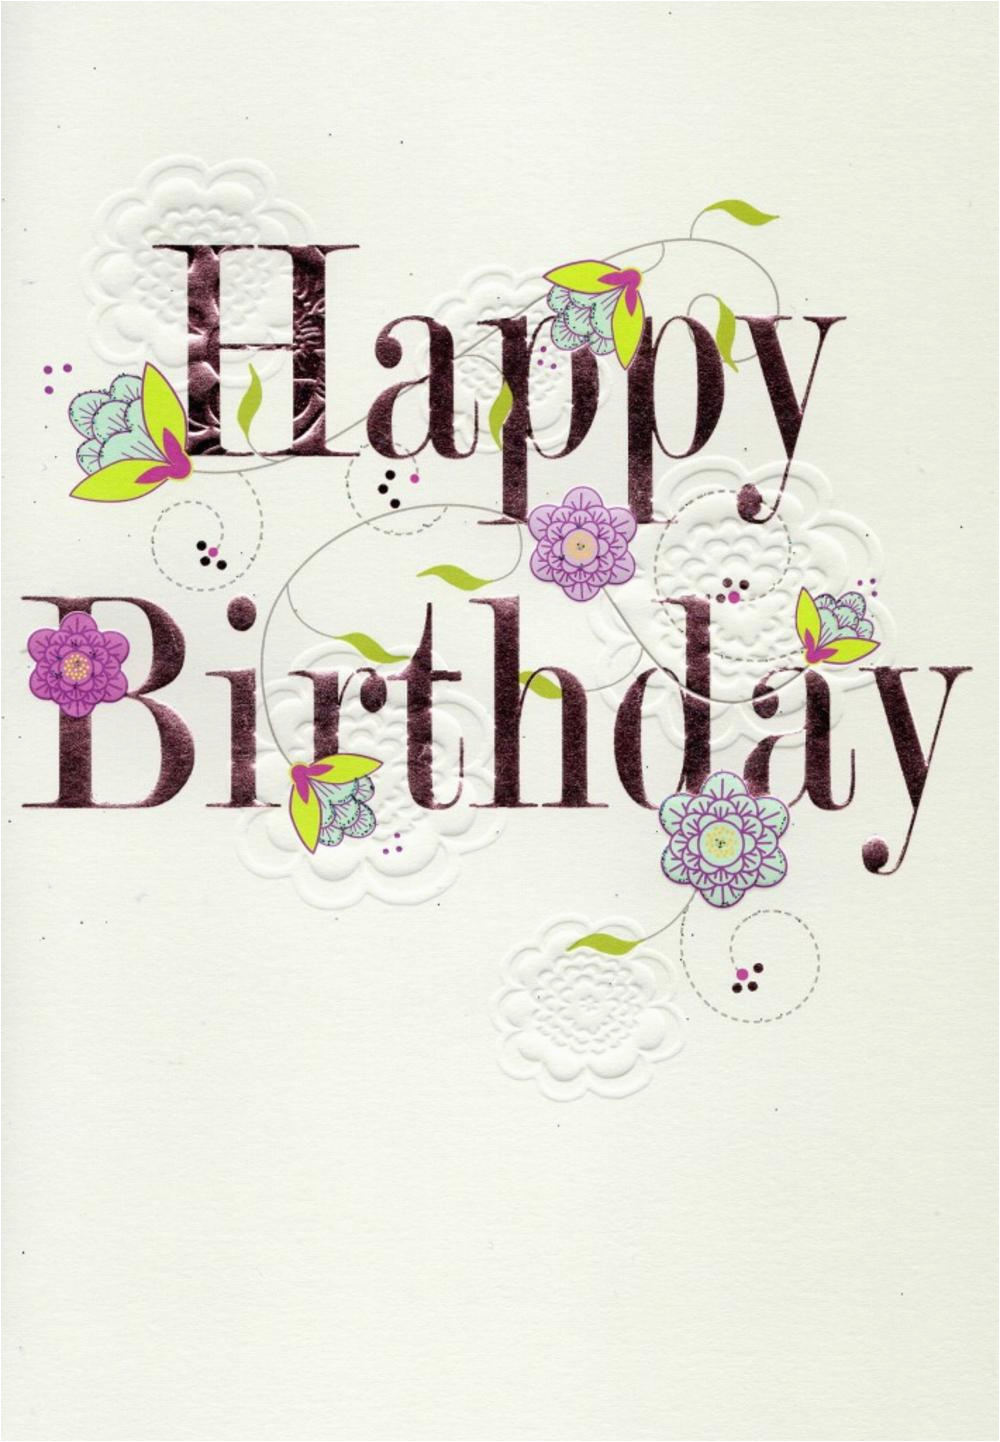 kcprfld006 pretty happy birthday greeting card lovely greetings cards nice verse